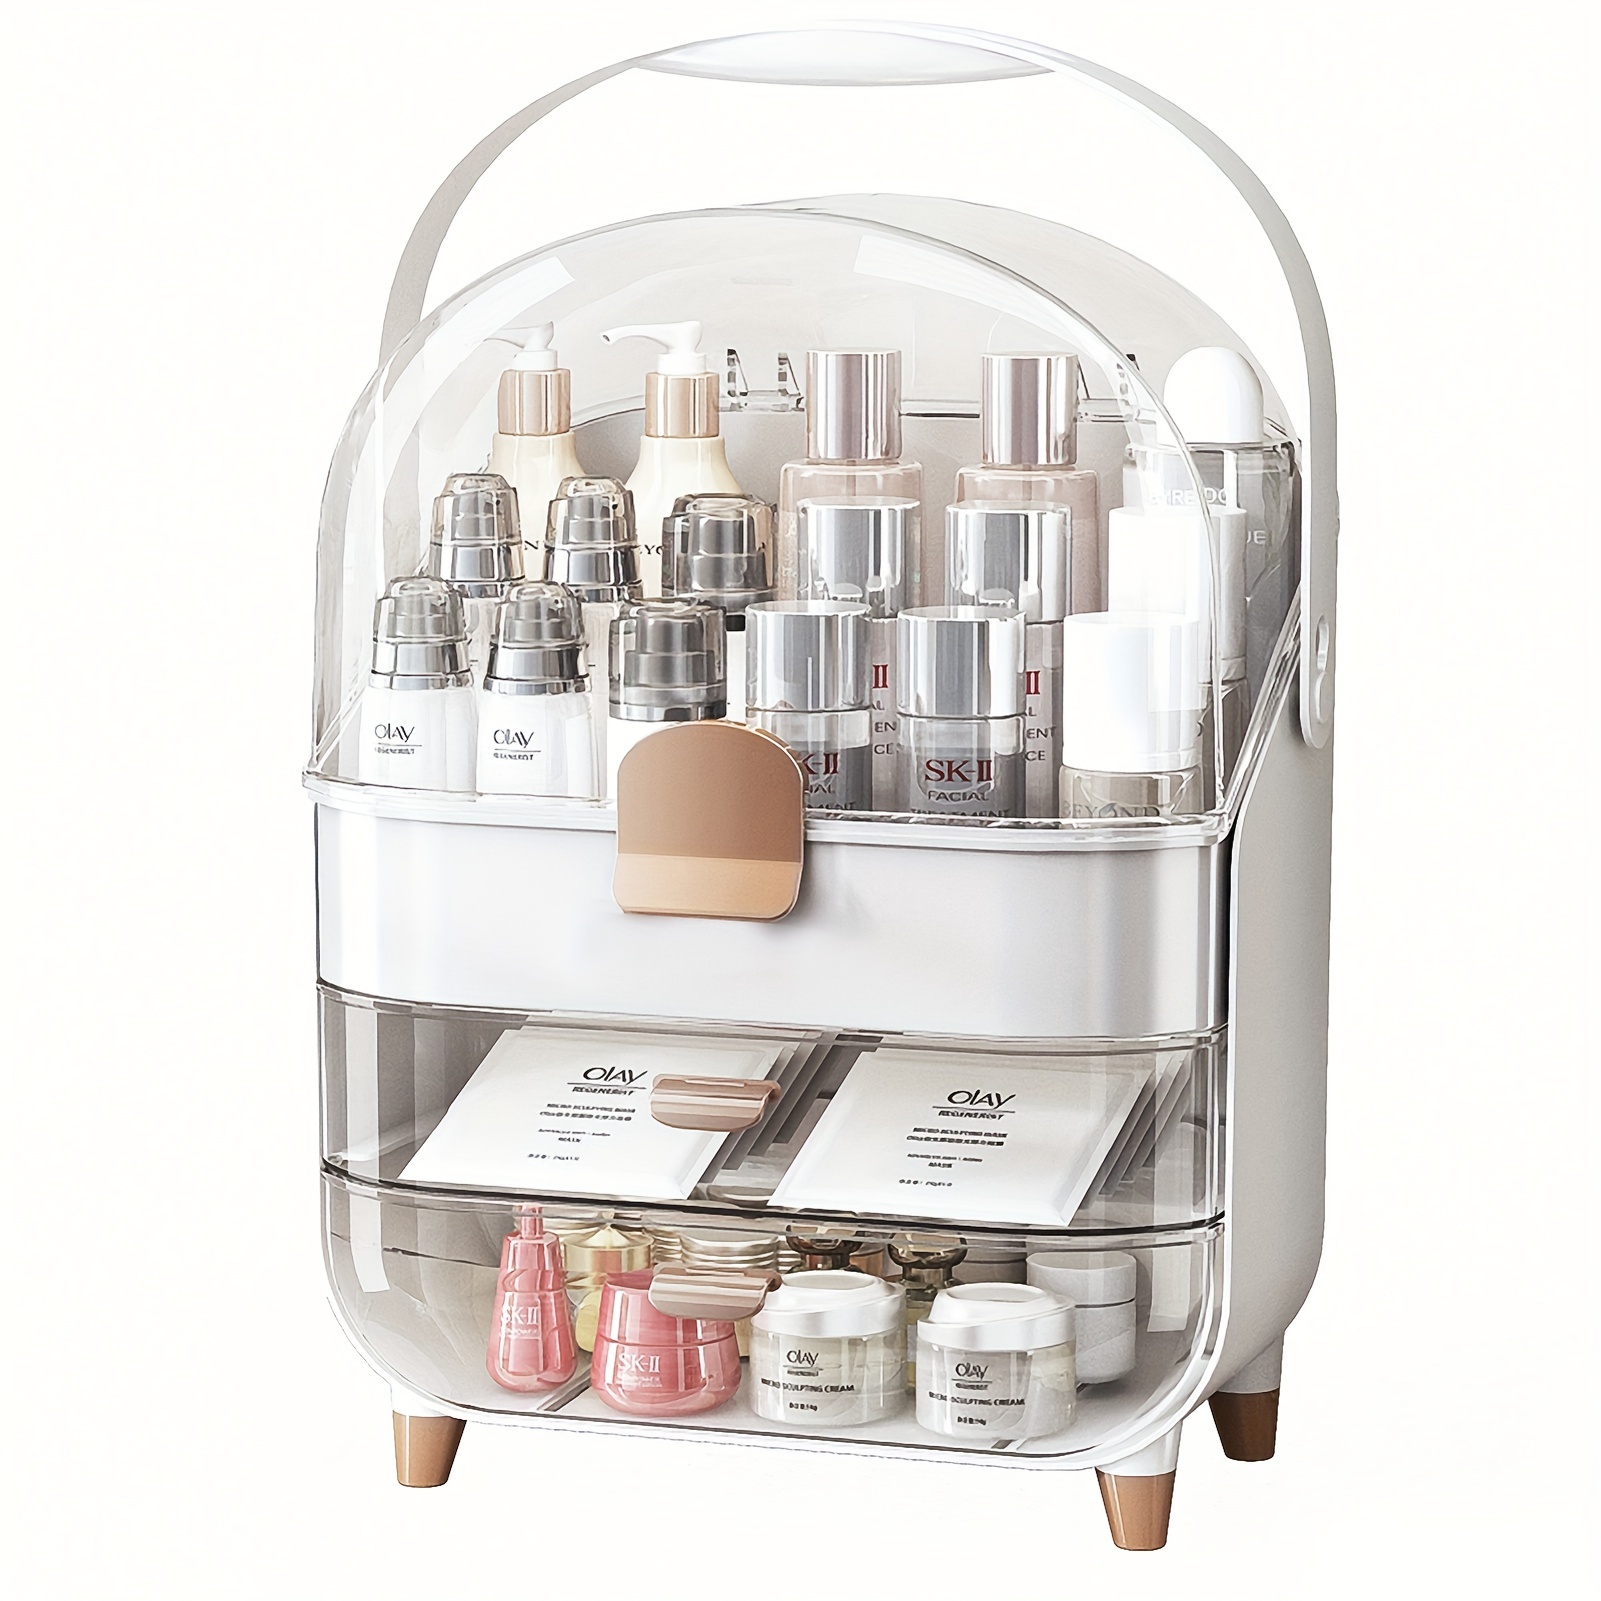 

Makeup Storage Organizers, Makeup Organizer For Vanity, Cosmetics Skincare Organizers With Lid And Drawers, Cosmetic Display Cases For Countertop, Bathroom, Ideal Gifts For Women